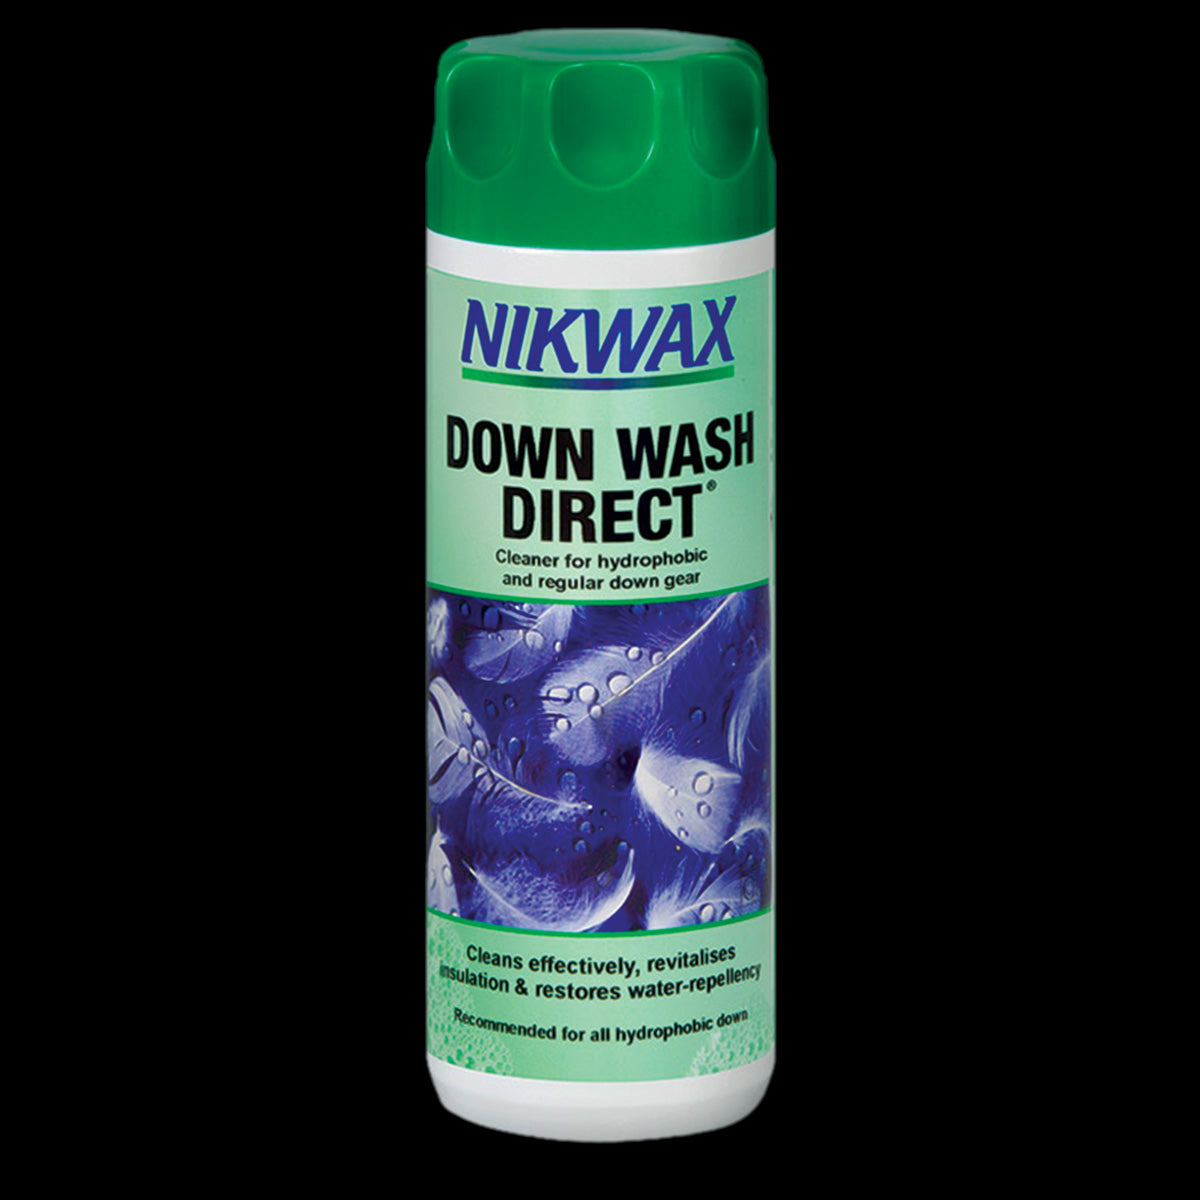 5 Ways Nikwax Supports Its Retailers